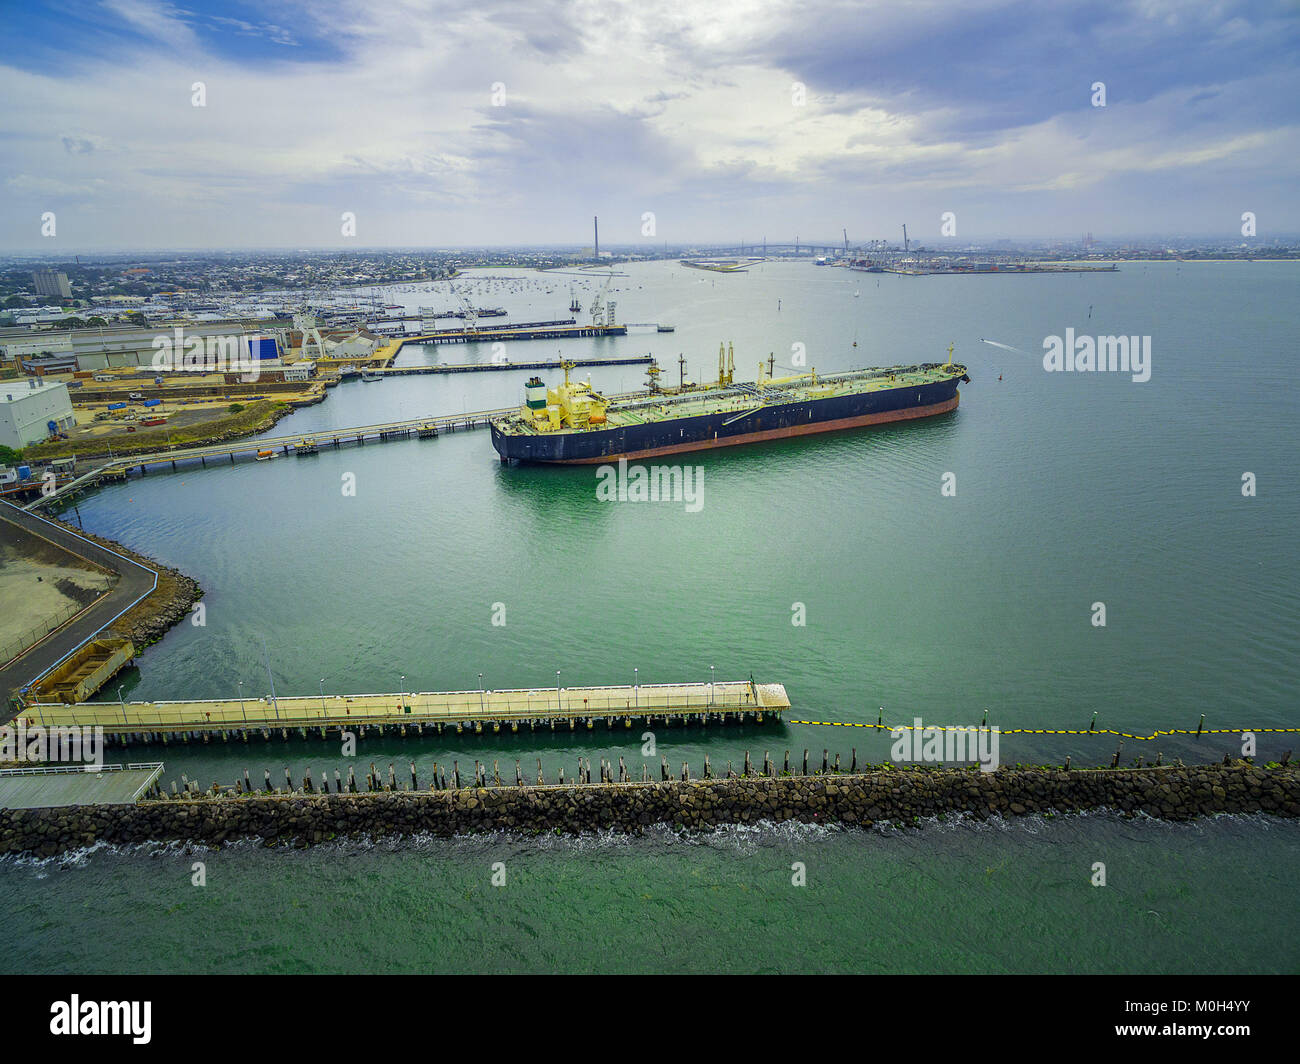 Aerial view of large industrial nautical vessel moored at docks in Williamstown, Melbourne, Australia Stock Photo